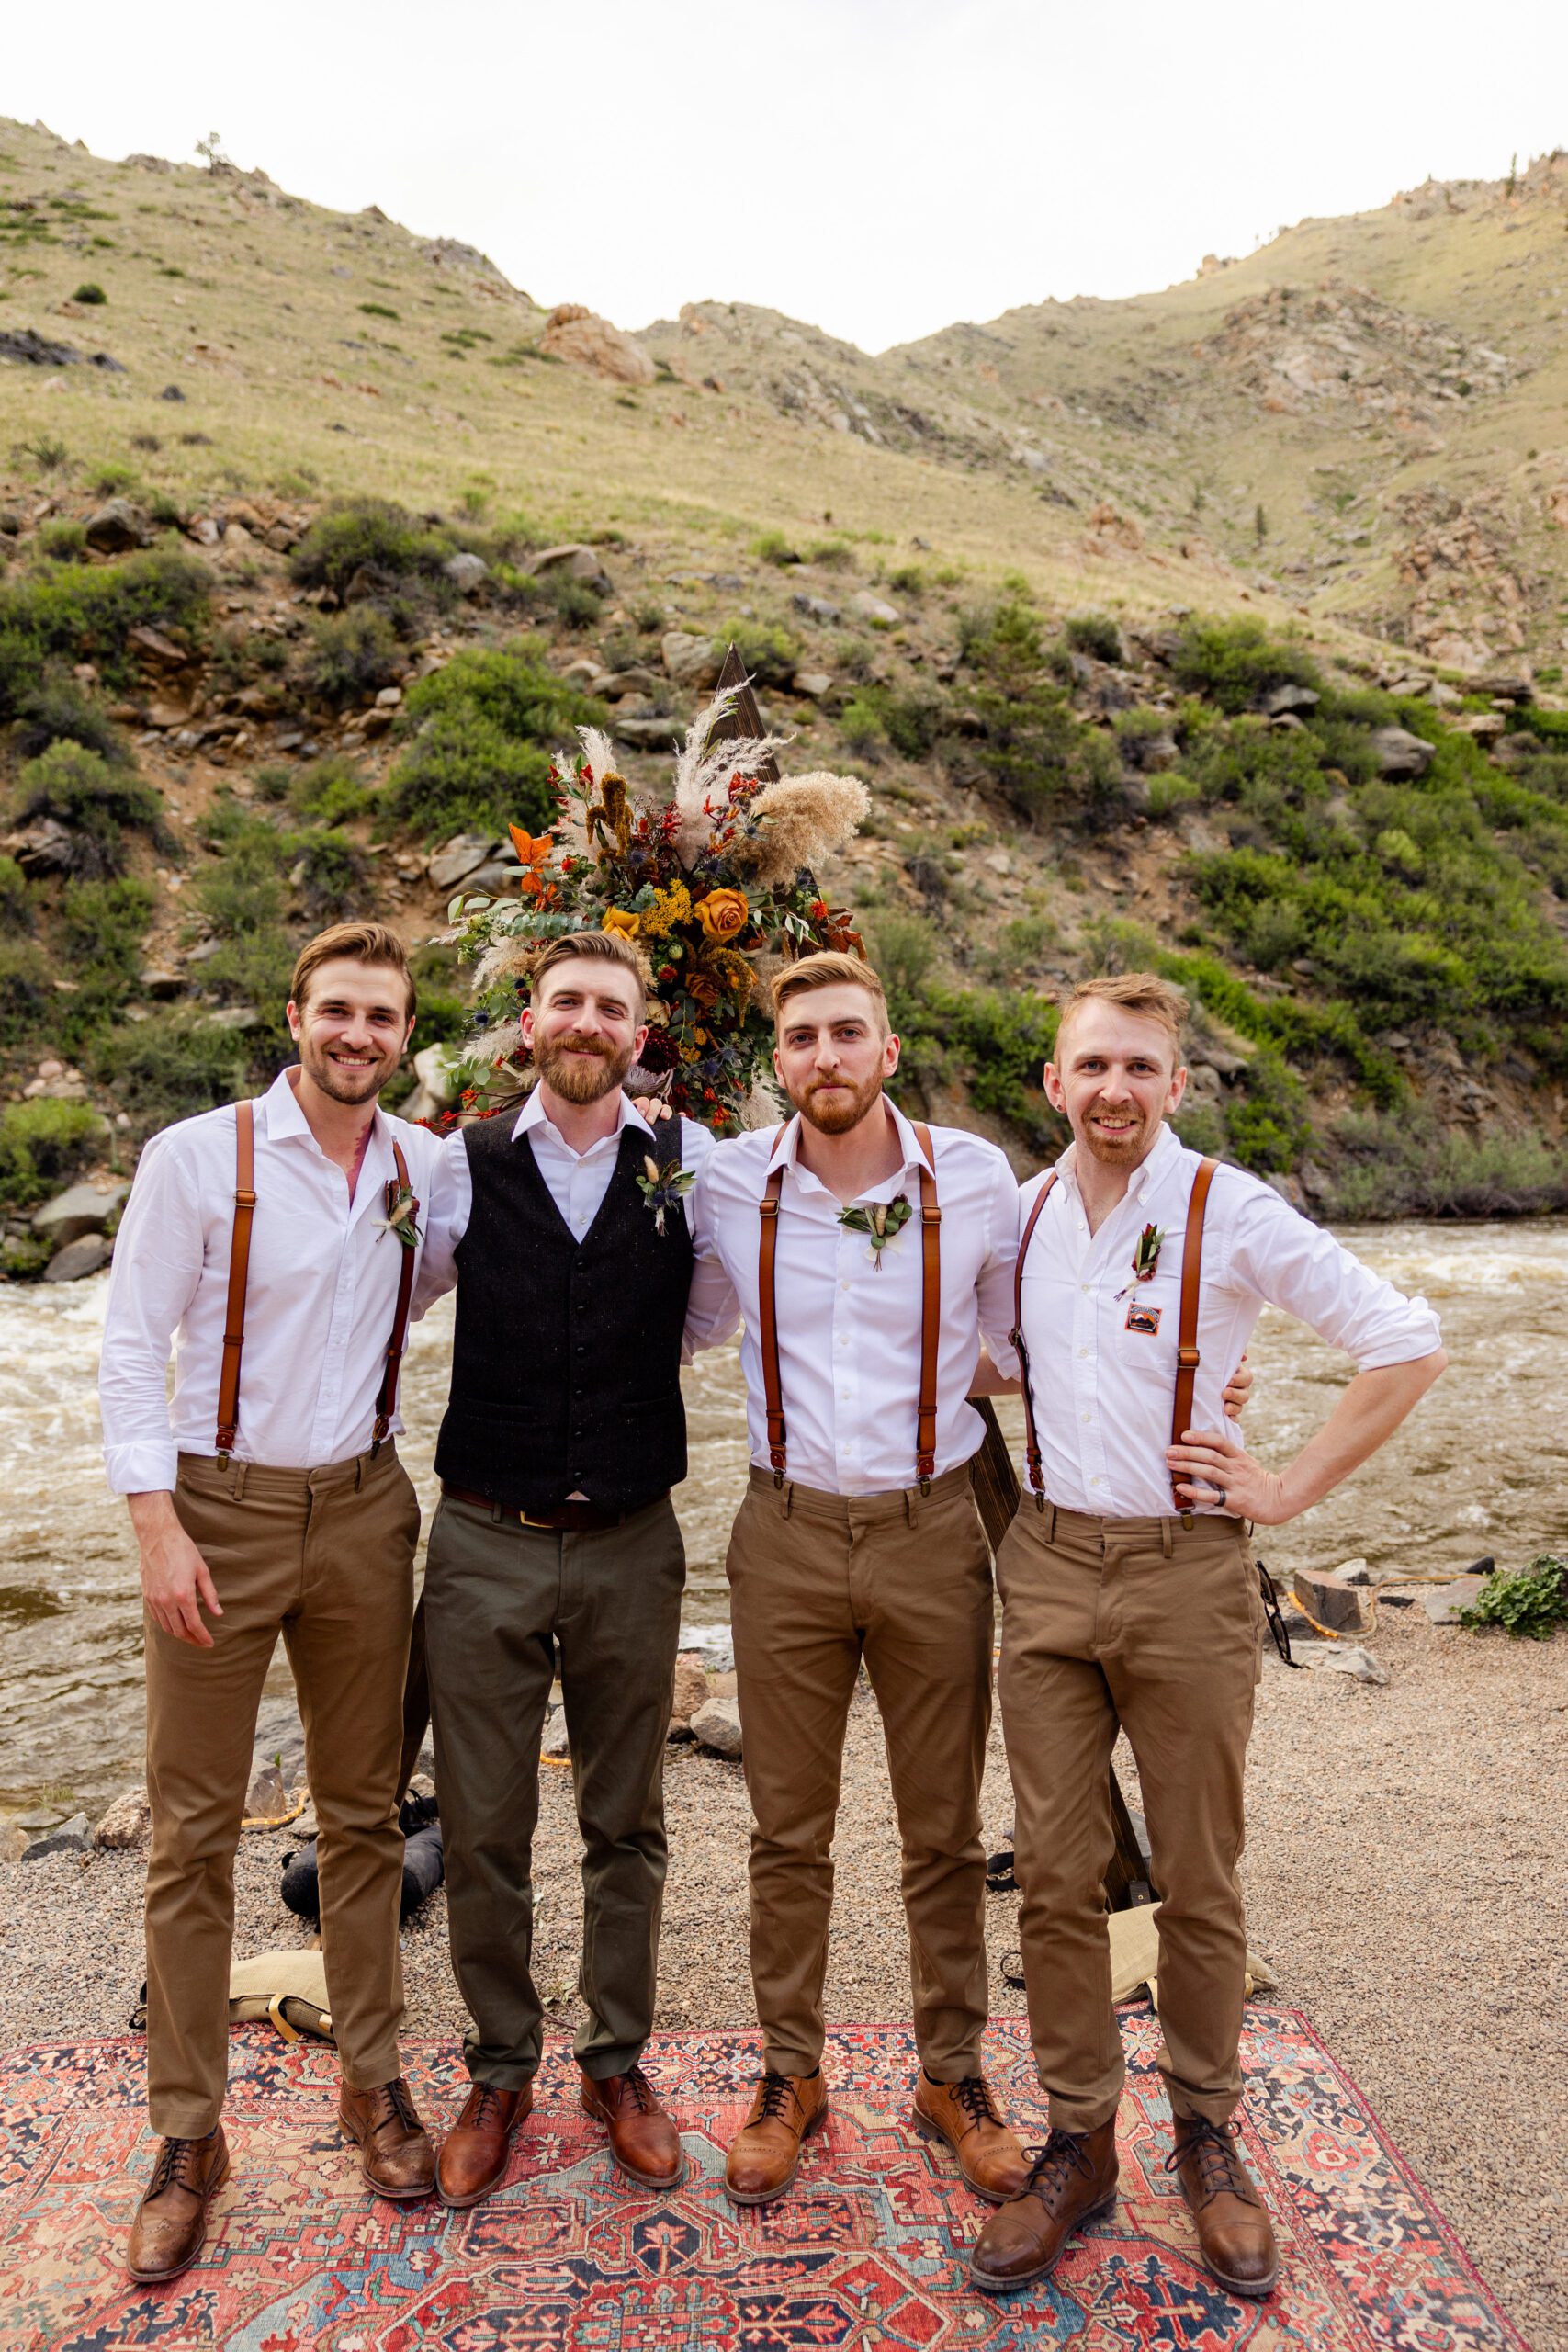 Groomsmen photos, Groomsmen outfits, Groomsmen outfit with suspenders